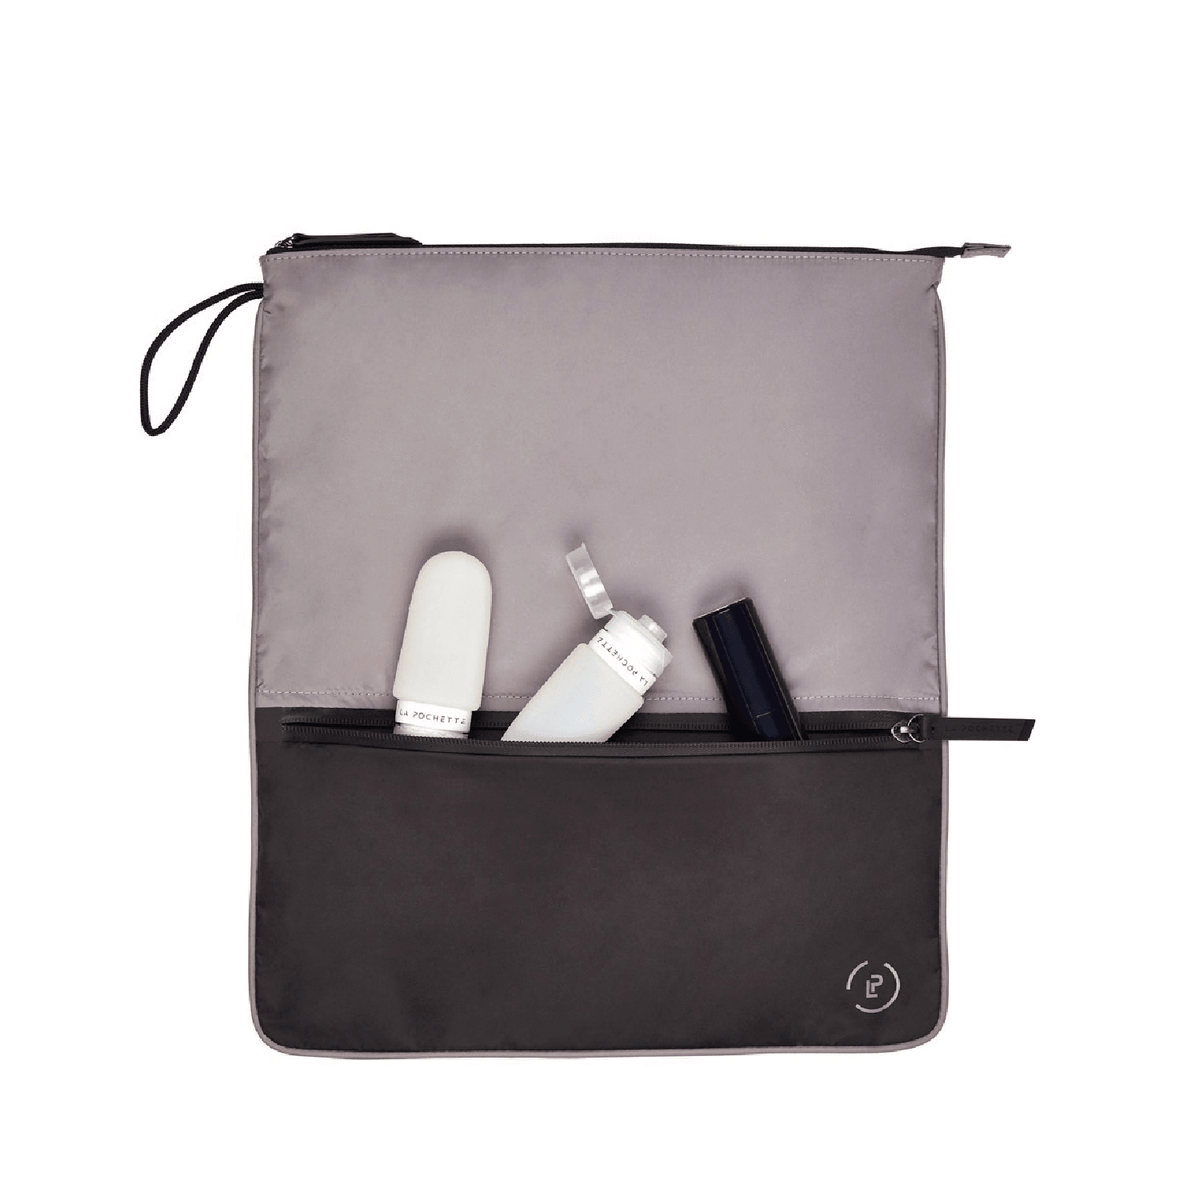 Pewter Ink Sweat Bag laid flat, topped with a small La Pochette Anywhere Everything Bag holding La Pochette silicone travel bottles.